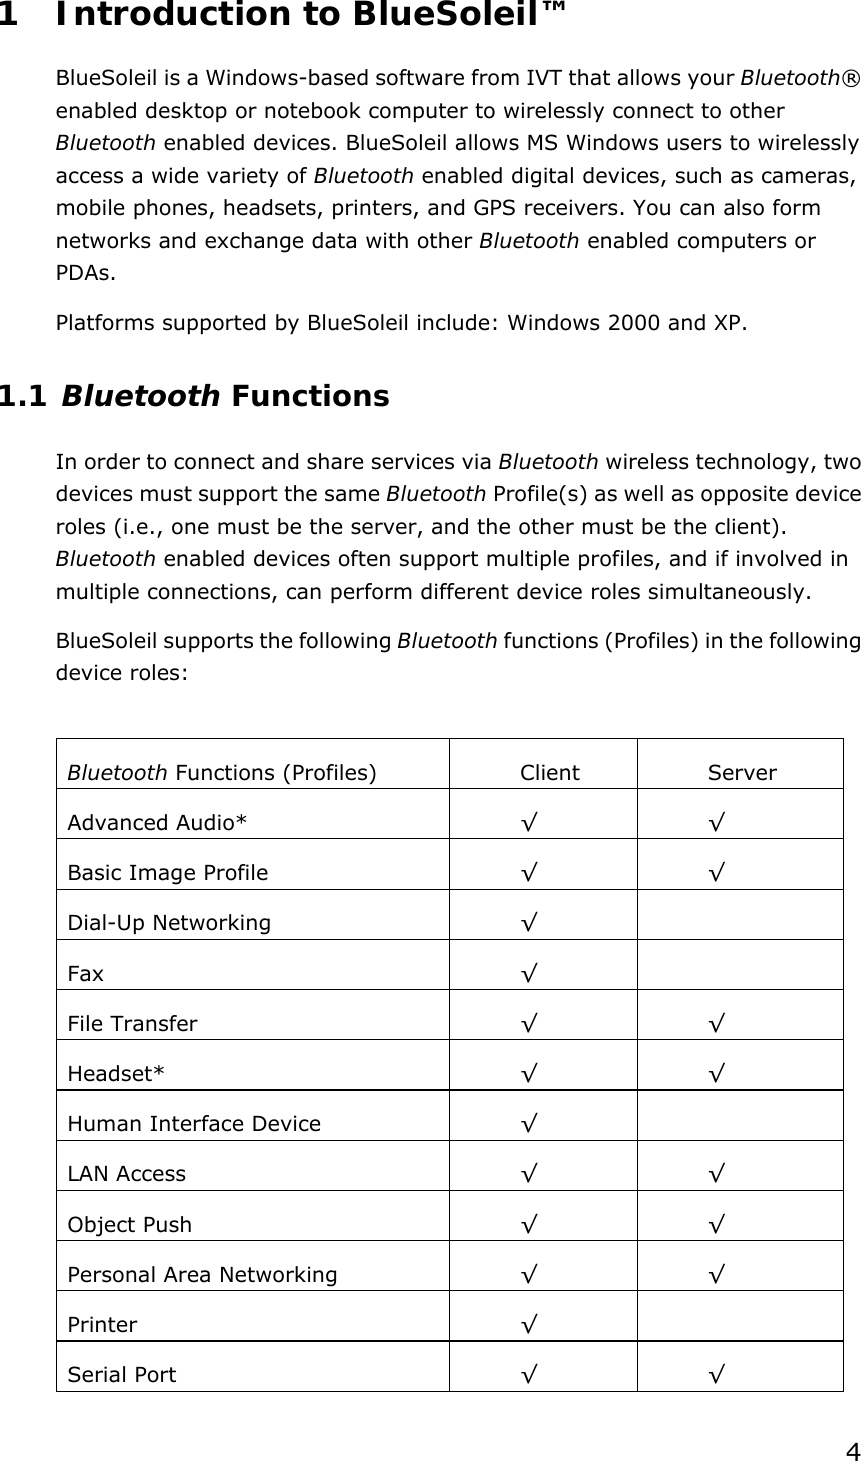  4 1 Introduction to BlueSoleil™ BlueSoleil is a Windows-based software from IVT that allows your Bluetooth® enabled desktop or notebook computer to wirelessly connect to other Bluetooth enabled devices. BlueSoleil allows MS Windows users to wirelessly access a wide variety of Bluetooth enabled digital devices, such as cameras, mobile phones, headsets, printers, and GPS receivers. You can also form networks and exchange data with other Bluetooth enabled computers or PDAs. Platforms supported by BlueSoleil include: Windows 2000 and XP. 1.1 Bluetooth Functions In order to connect and share services via Bluetooth wireless technology, two devices must support the same Bluetooth Profile(s) as well as opposite device roles (i.e., one must be the server, and the other must be the client). Bluetooth enabled devices often support multiple profiles, and if involved in multiple connections, can perform different device roles simultaneously. BlueSoleil supports the following Bluetooth functions (Profiles) in the following device roles:  Bluetooth Functions (Profiles)  Client  Server Advanced Audio*  √ √ Basic Image Profile  √ √ Dial-Up Networking  √  Fax  √  File Transfer  √ √ Headset*  √ √ Human Interface Device  √  LAN Access  √ √ Object Push  √ √ Personal Area Networking  √ √ Printer  √  Serial Port  √ √ 